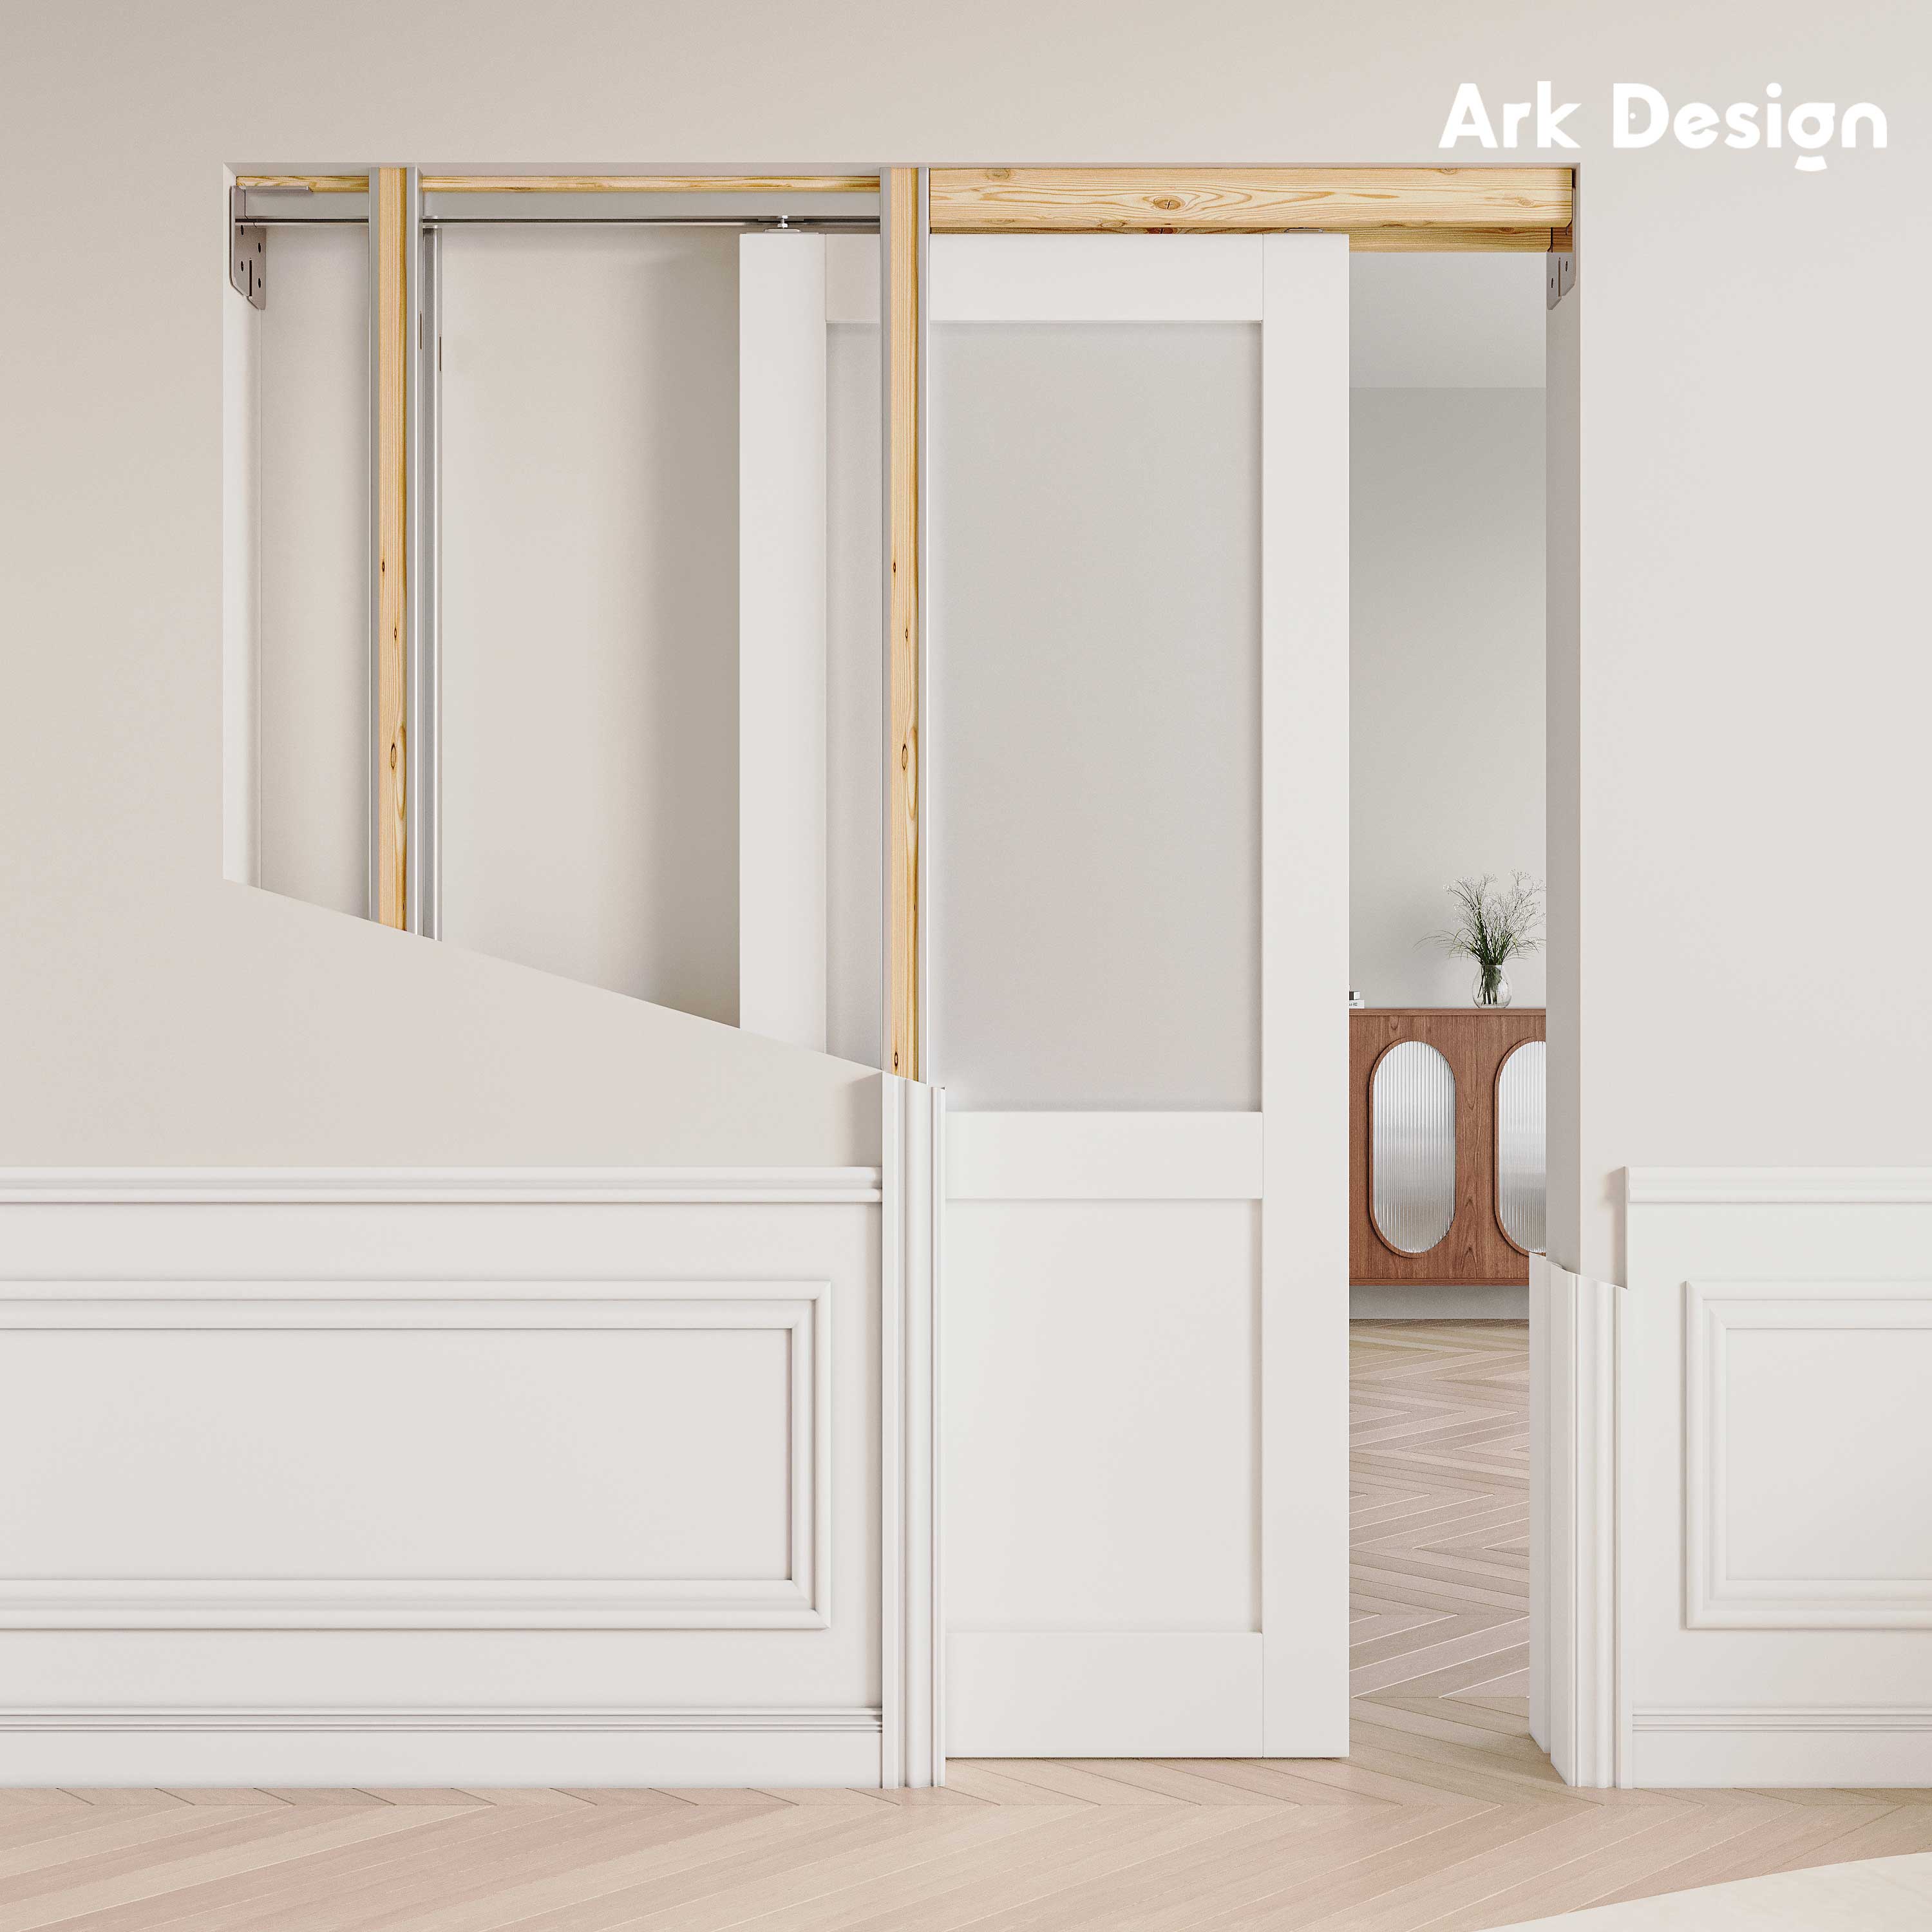 Ark Design Half Lite Tempered Frosted Glass Pocket Door with Hardware Kit & Frame, Solid Core MDF Wood & Paint-grade Finished, White